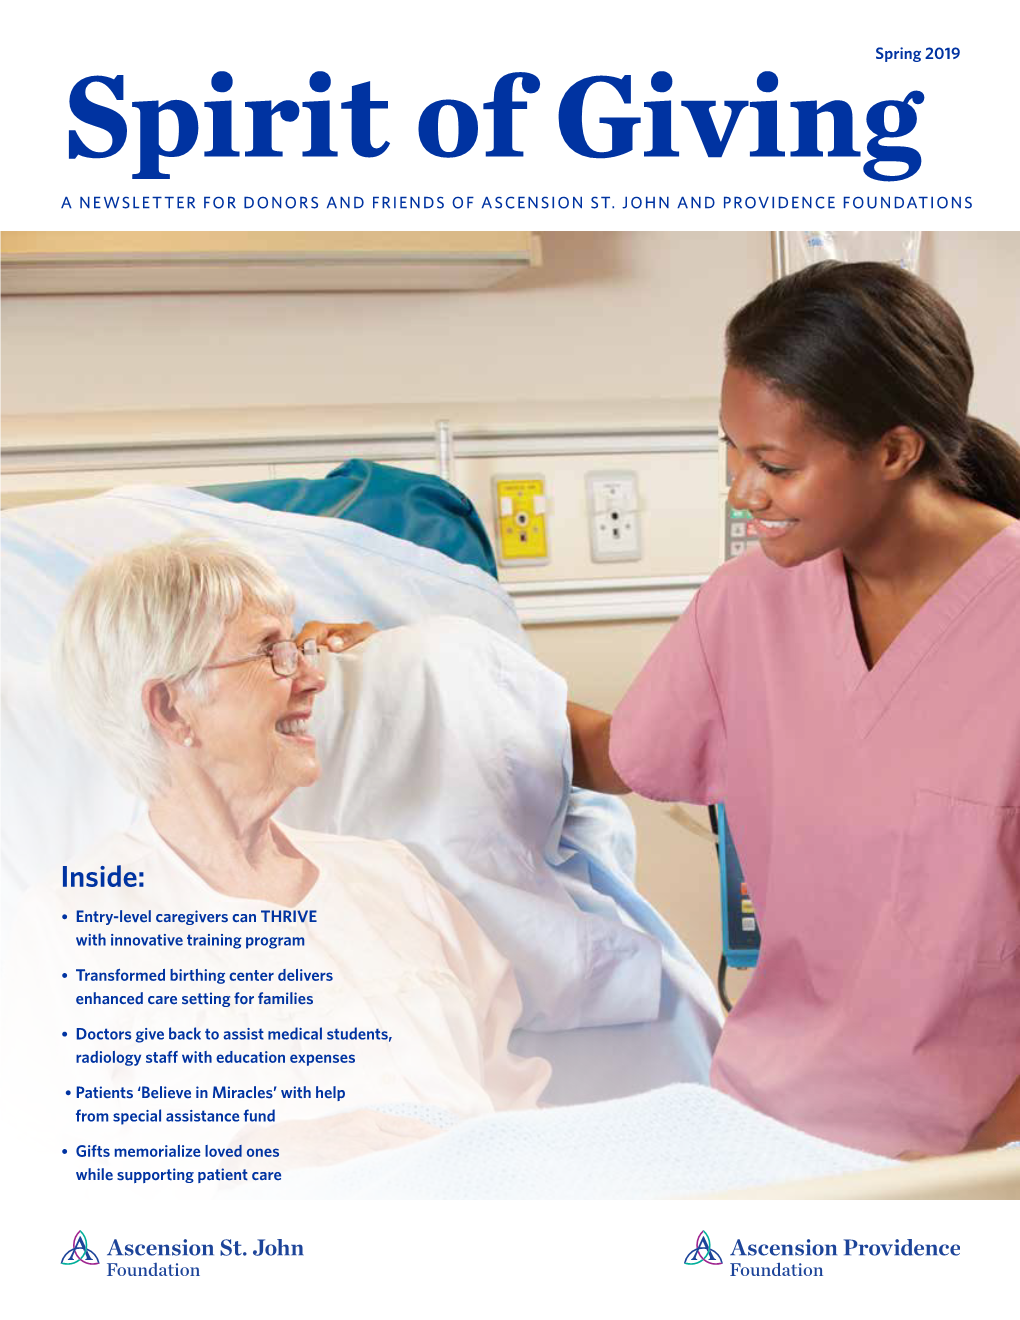 Inside: • Entry-Level Caregivers Can THRIVE with Innovative Training Program